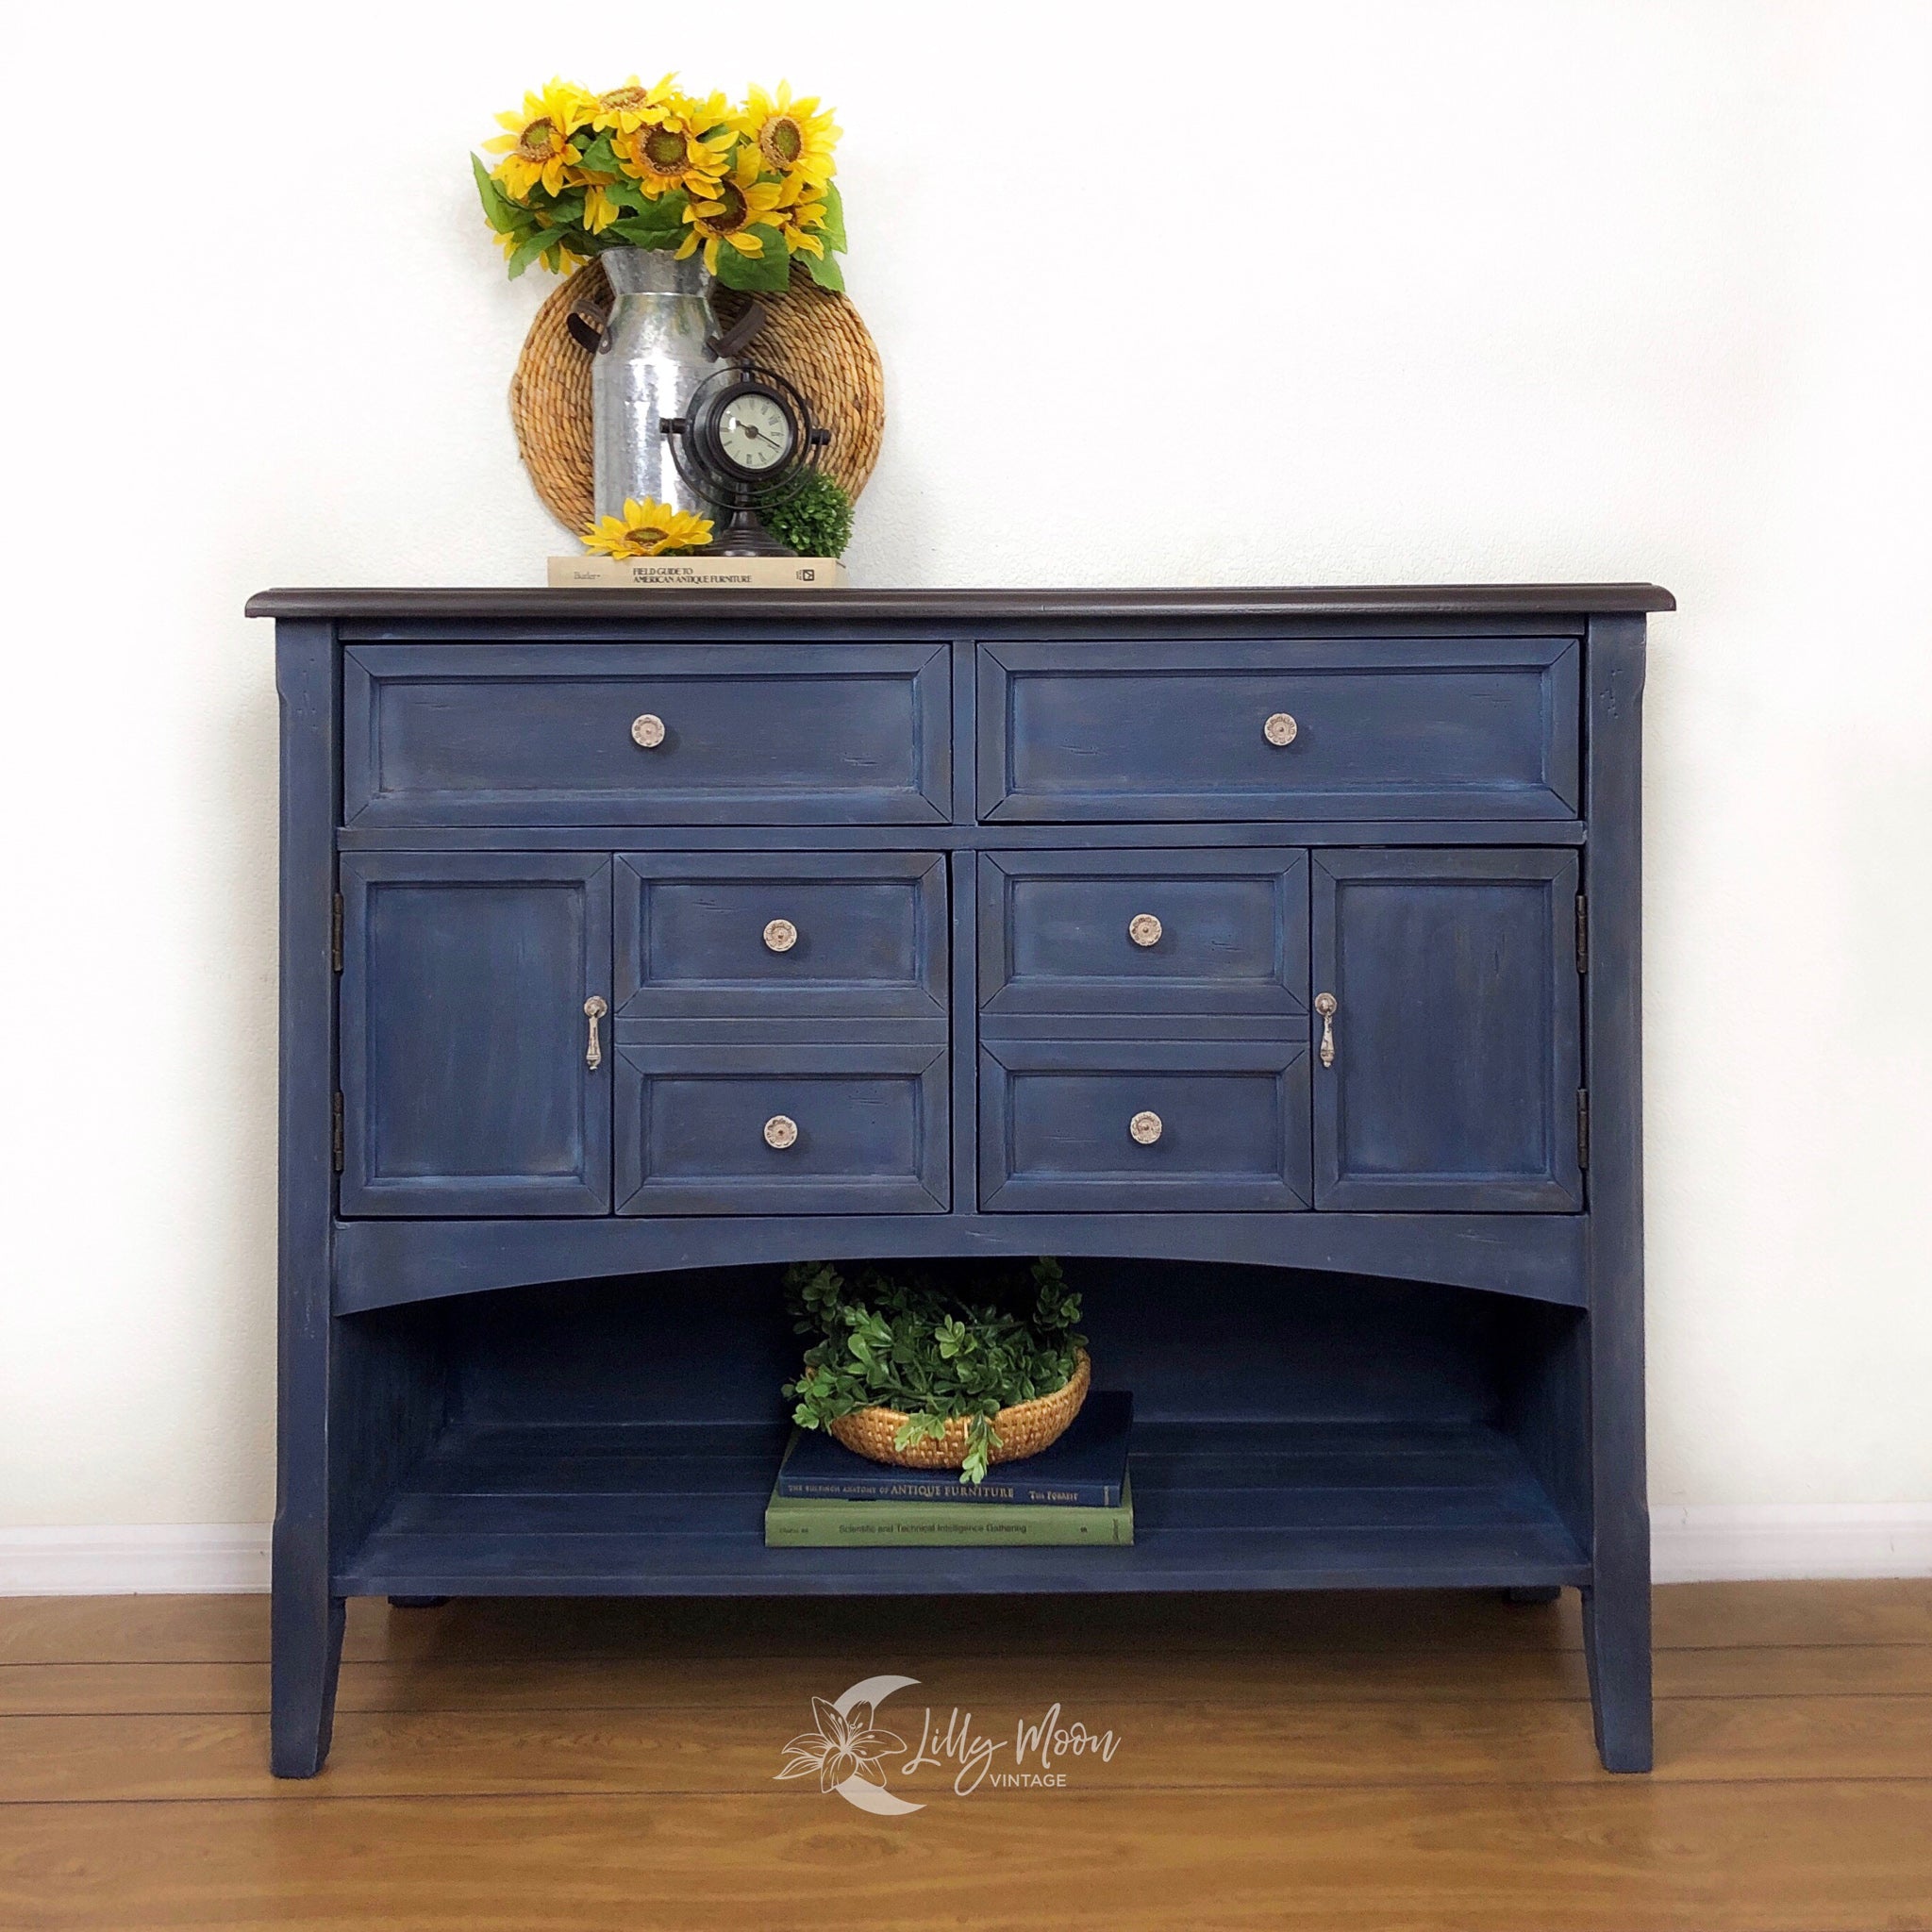 A vintage console table with storage refurbised by Lilly Moon Vintage features Dixie Belle's Bunker Hill Blue chalk mineral paint.